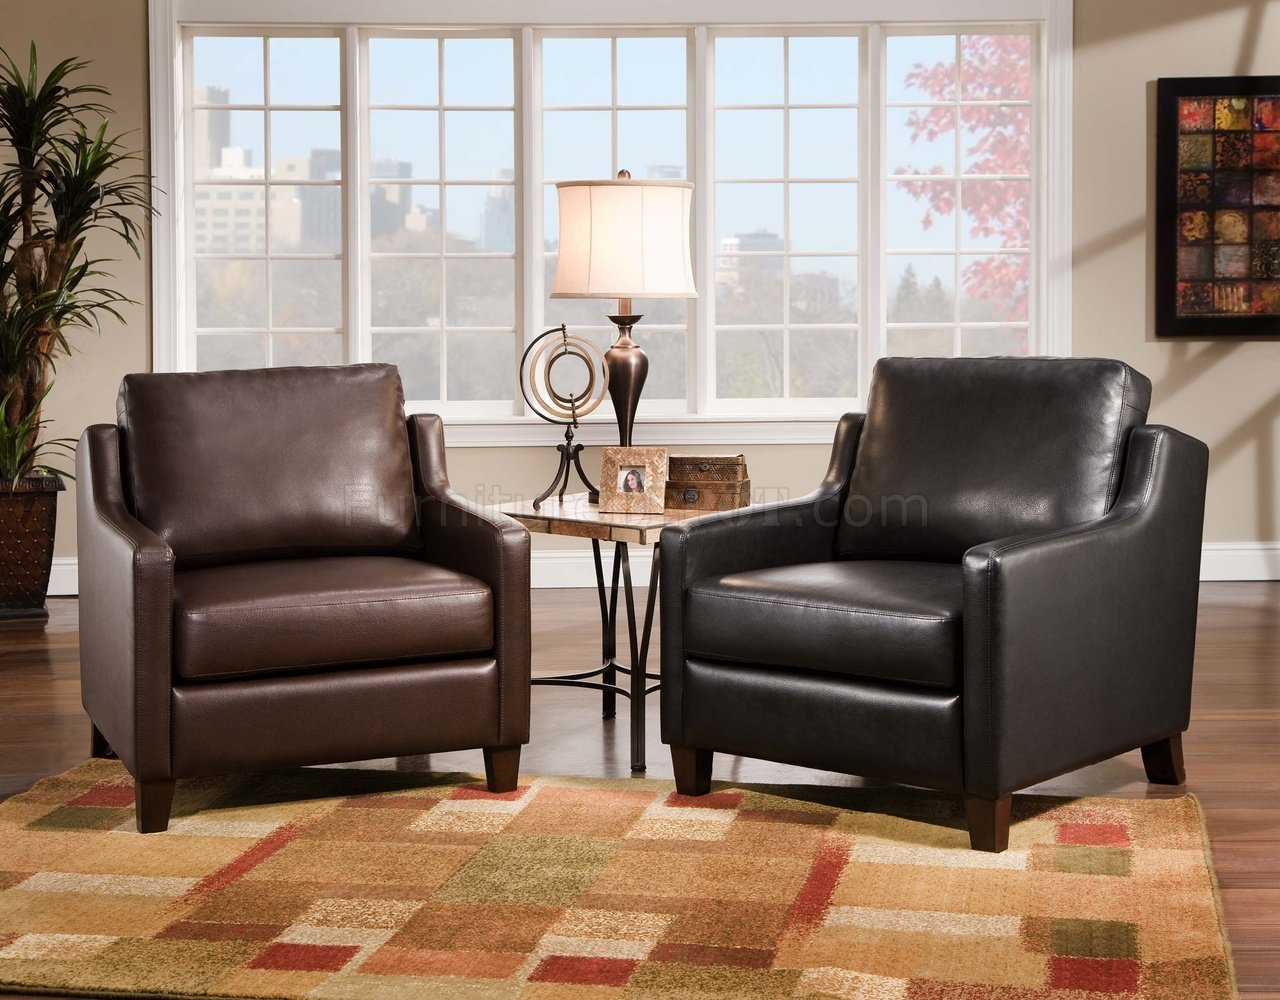 Or Brown Bonded Leather Modern Accent Chair, Black Leather Living Room Chair